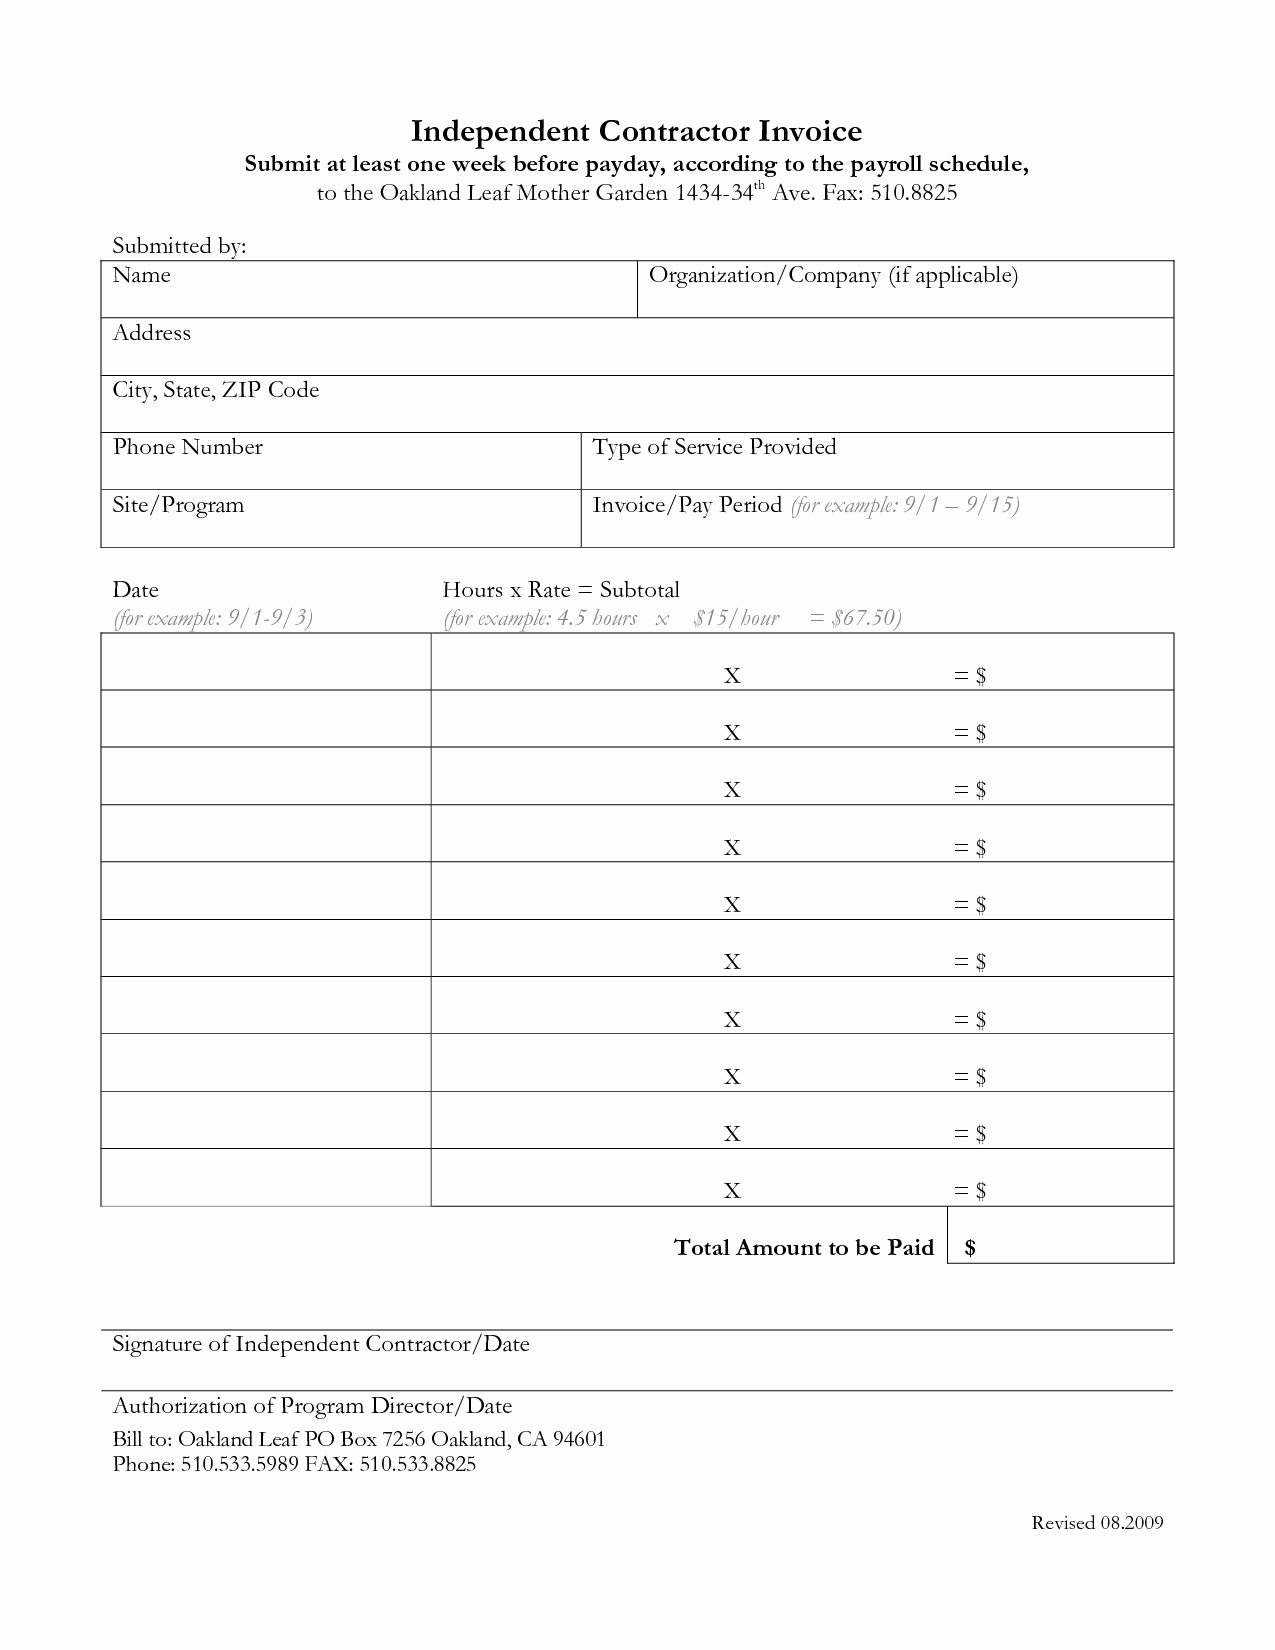 Independent Contractor Invoice Template Free Fresh Independent Contractor Invoice Template Free